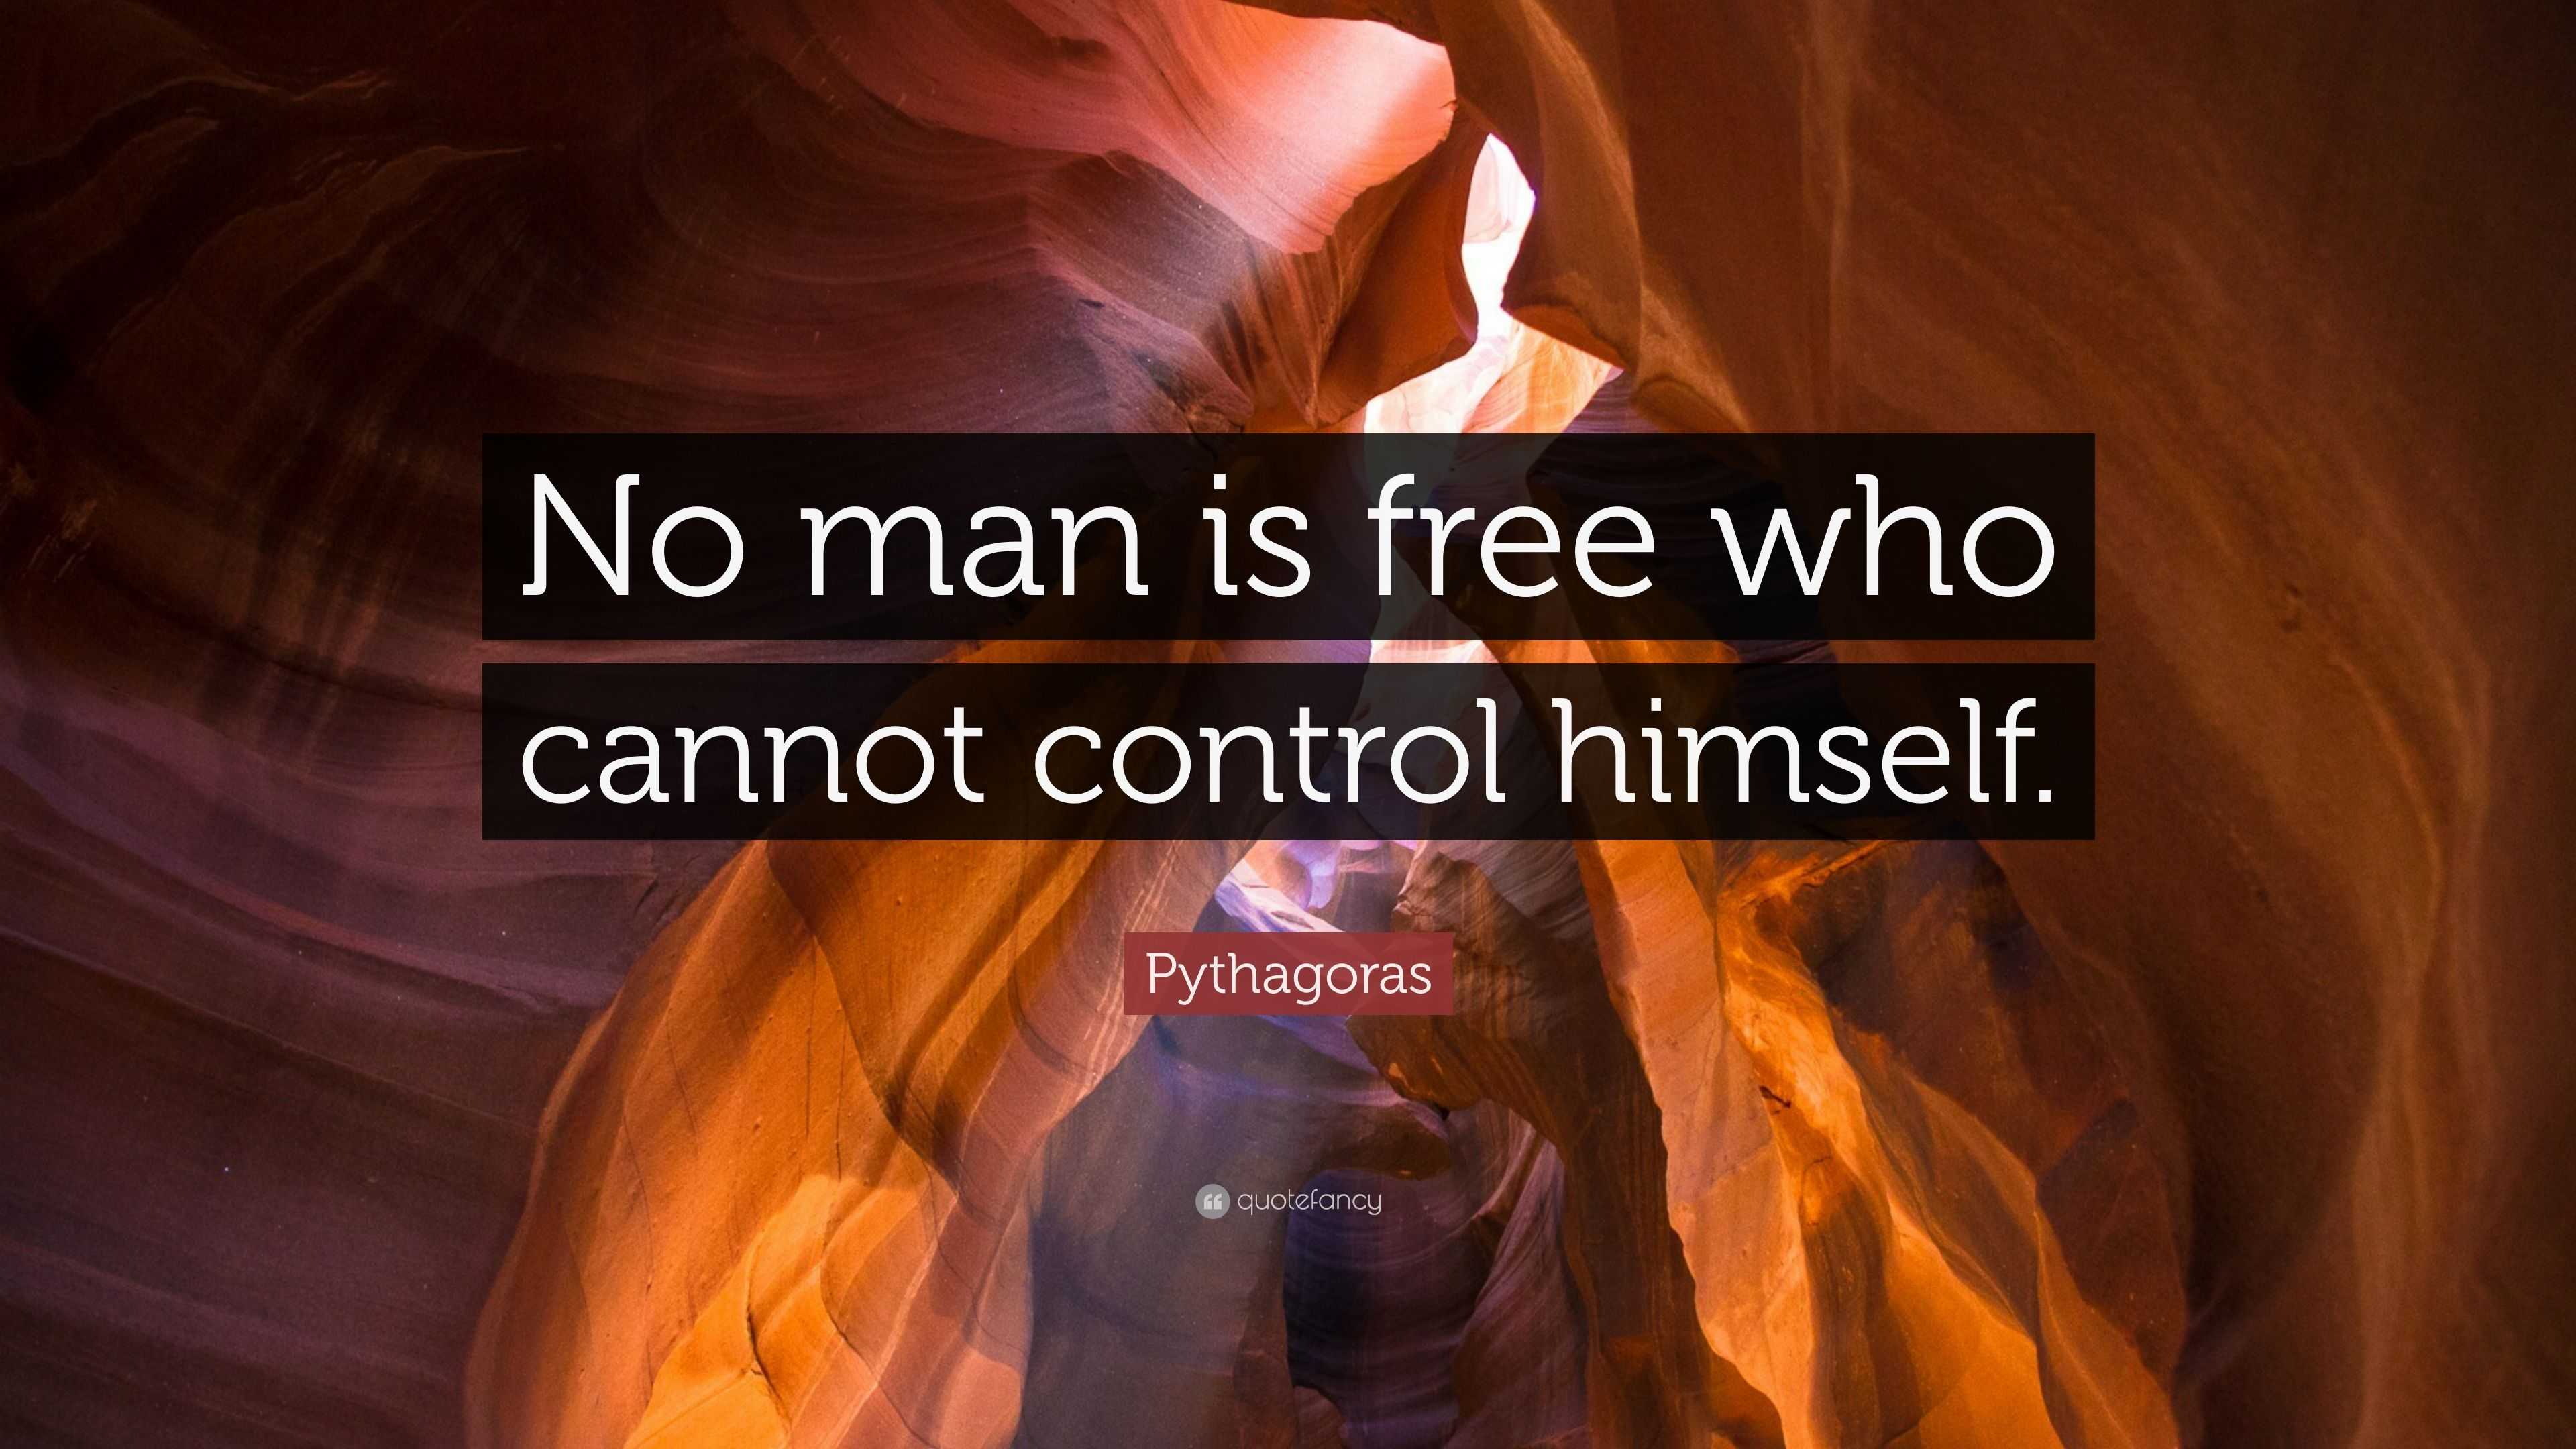 Pythagoras Quote: “No man is free who cannot control himself.”